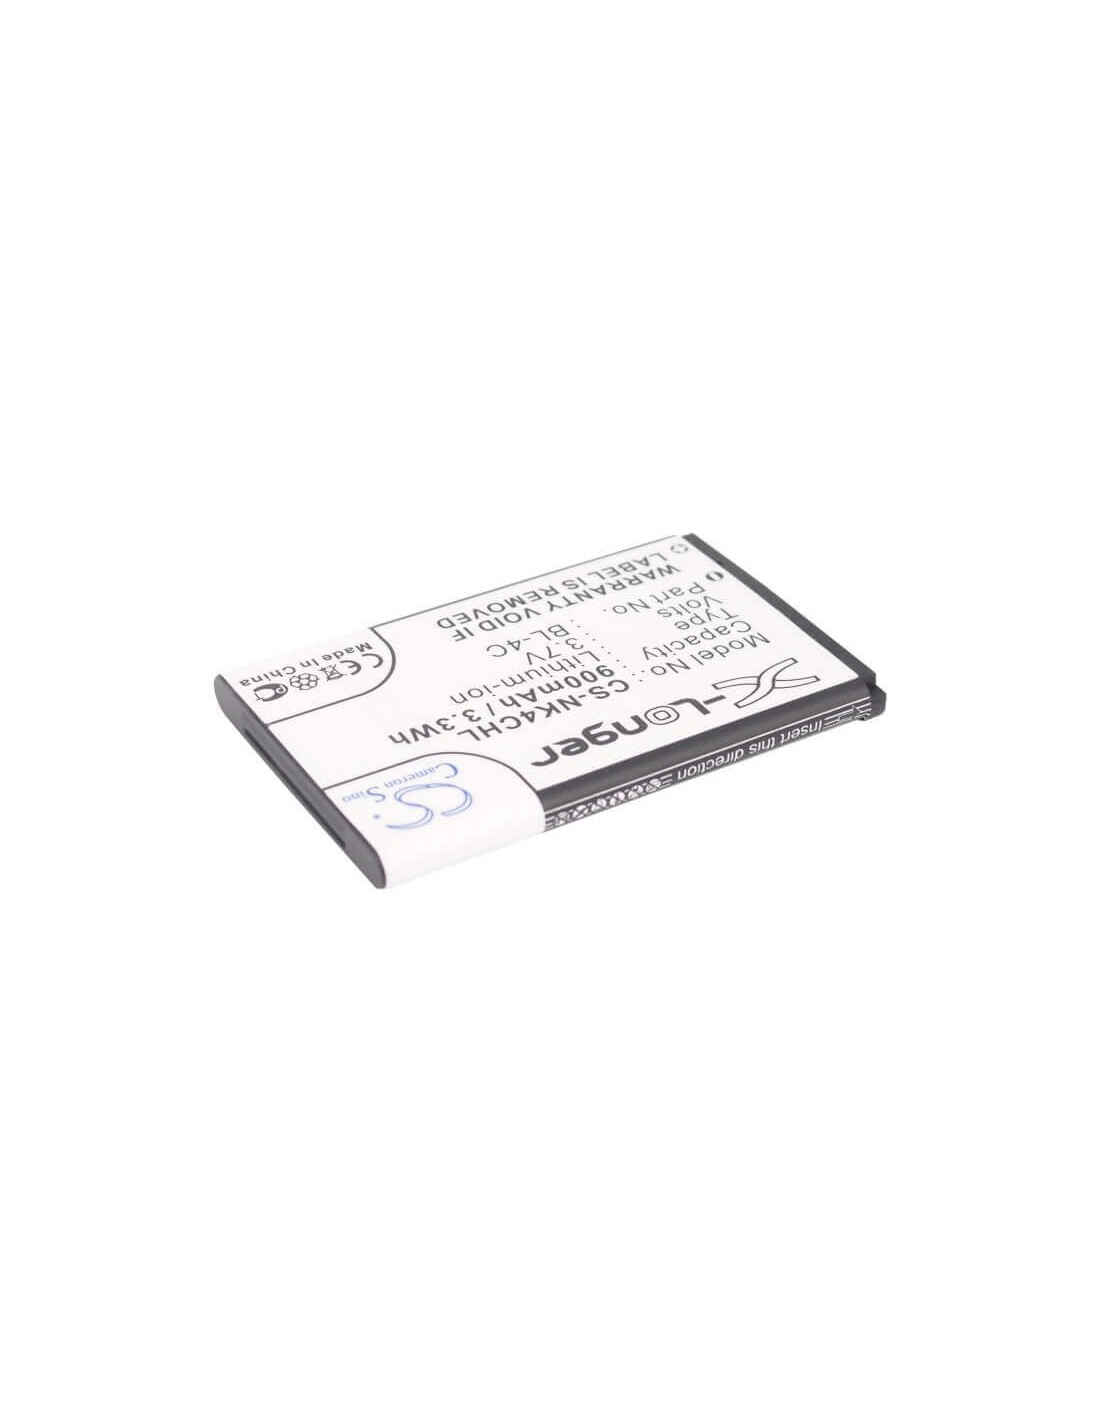 Battery for Rollei Compactline 83 3.7V, 900mAh - 3.33Wh